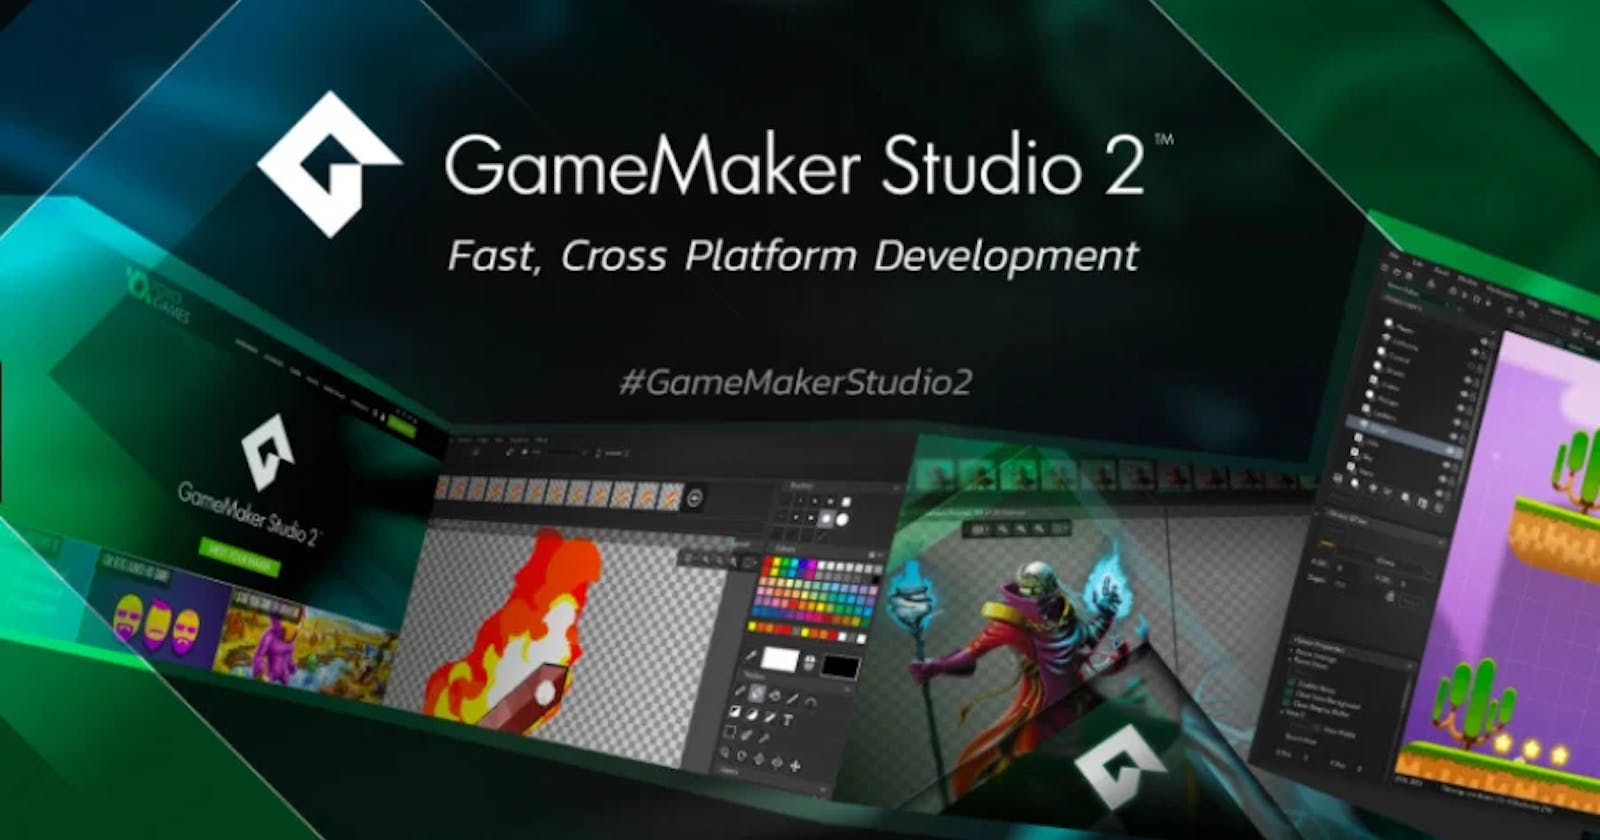 Building your first 2d game using Game maker studio